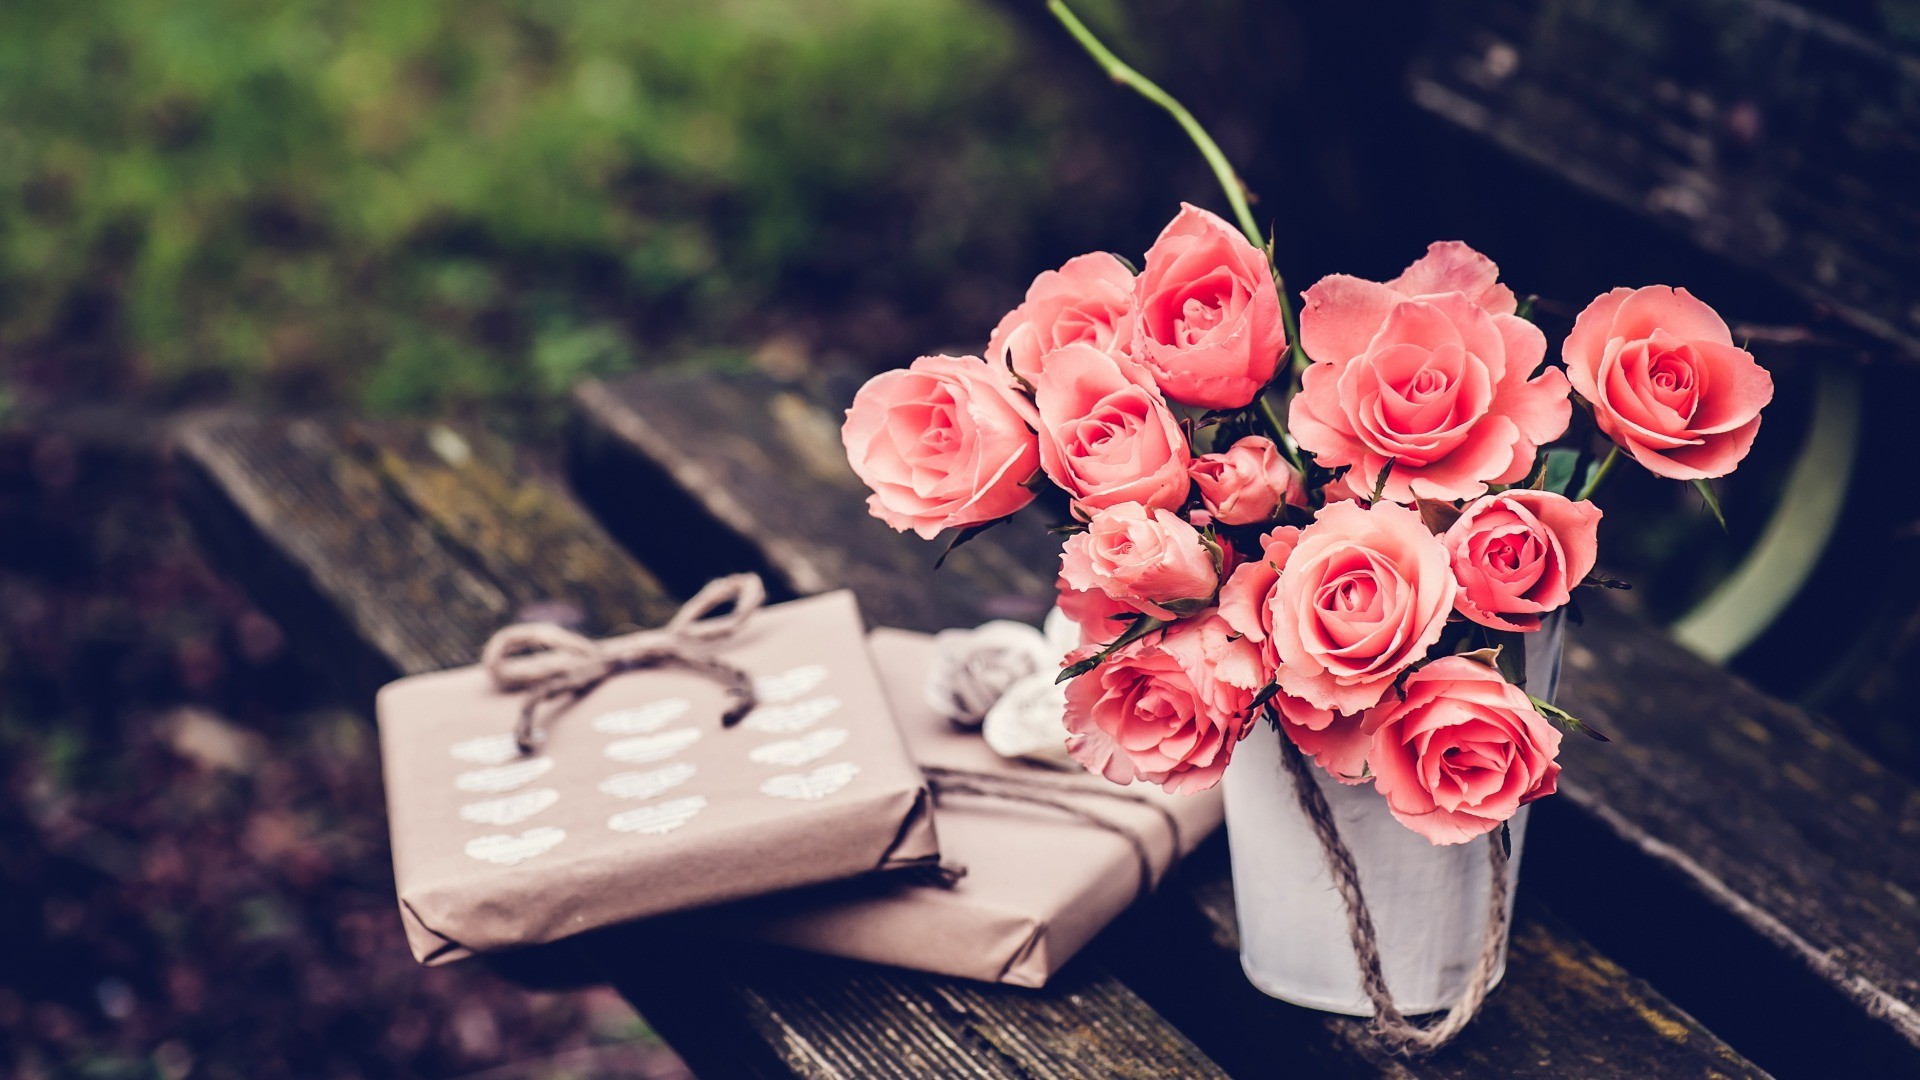 Wallpaper, flowers, love, red, bench, rose, blossom, presents, pink, emotion, spring, bouquets, flora, wedding, petal, 1920x1080 px, land plant, flowering plant, close up, macro photography, floristry, ceremony, flower bouquet, flower arranging